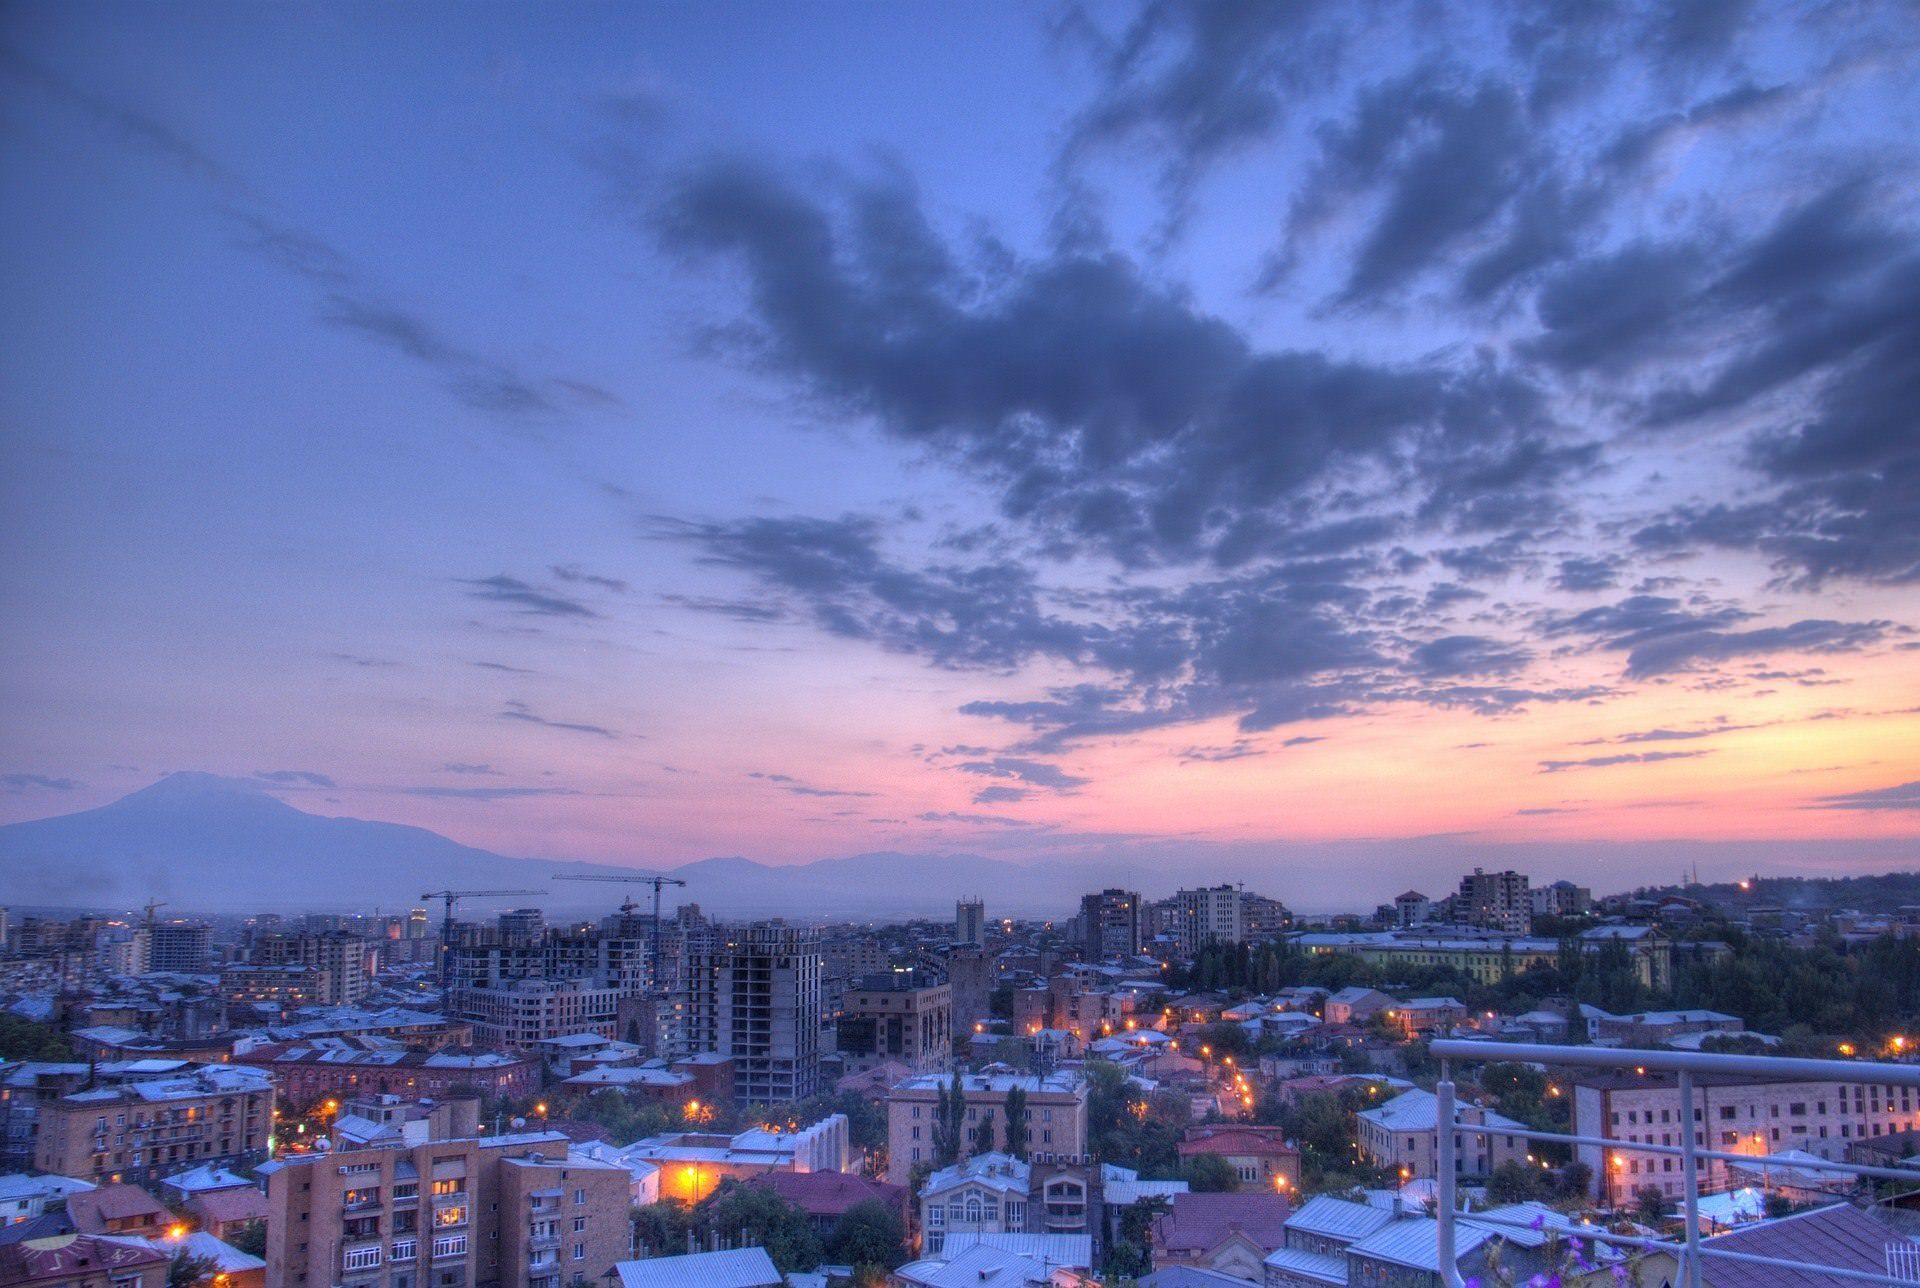 Spend some time in Yerevan, too!